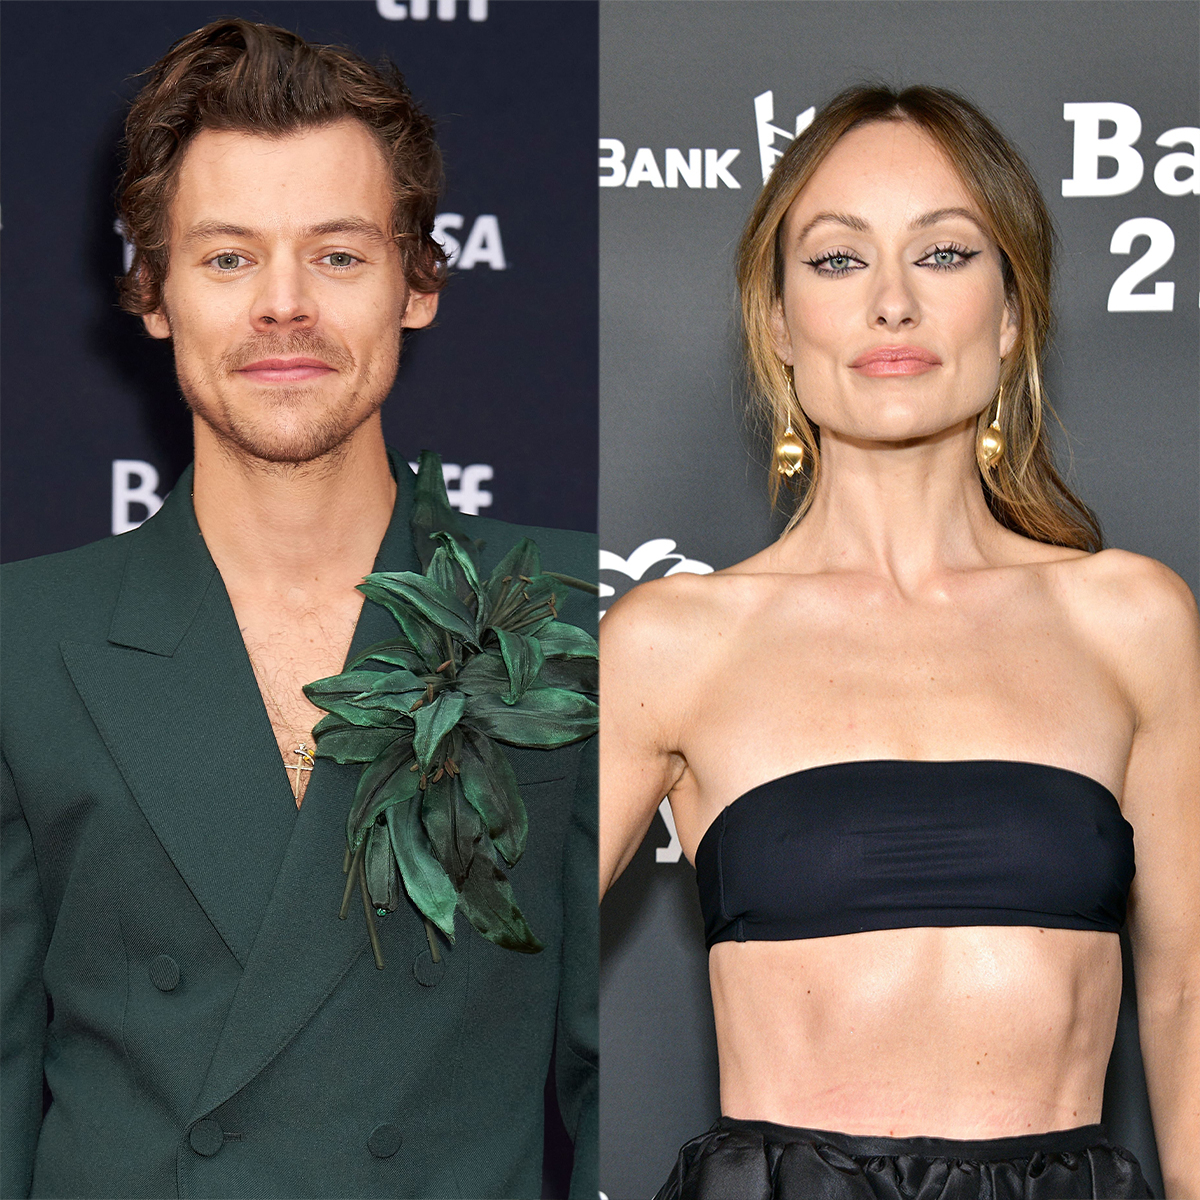 https://akns-images.eonline.com/eol_images/Entire_Site/20221016/rs_1200x1200-221116182137-_Harry-Styles-and-Olivia-Wilde-2.jpg?fit=around%7C1080:1080&output-quality=90&crop=1080:1080;center,top